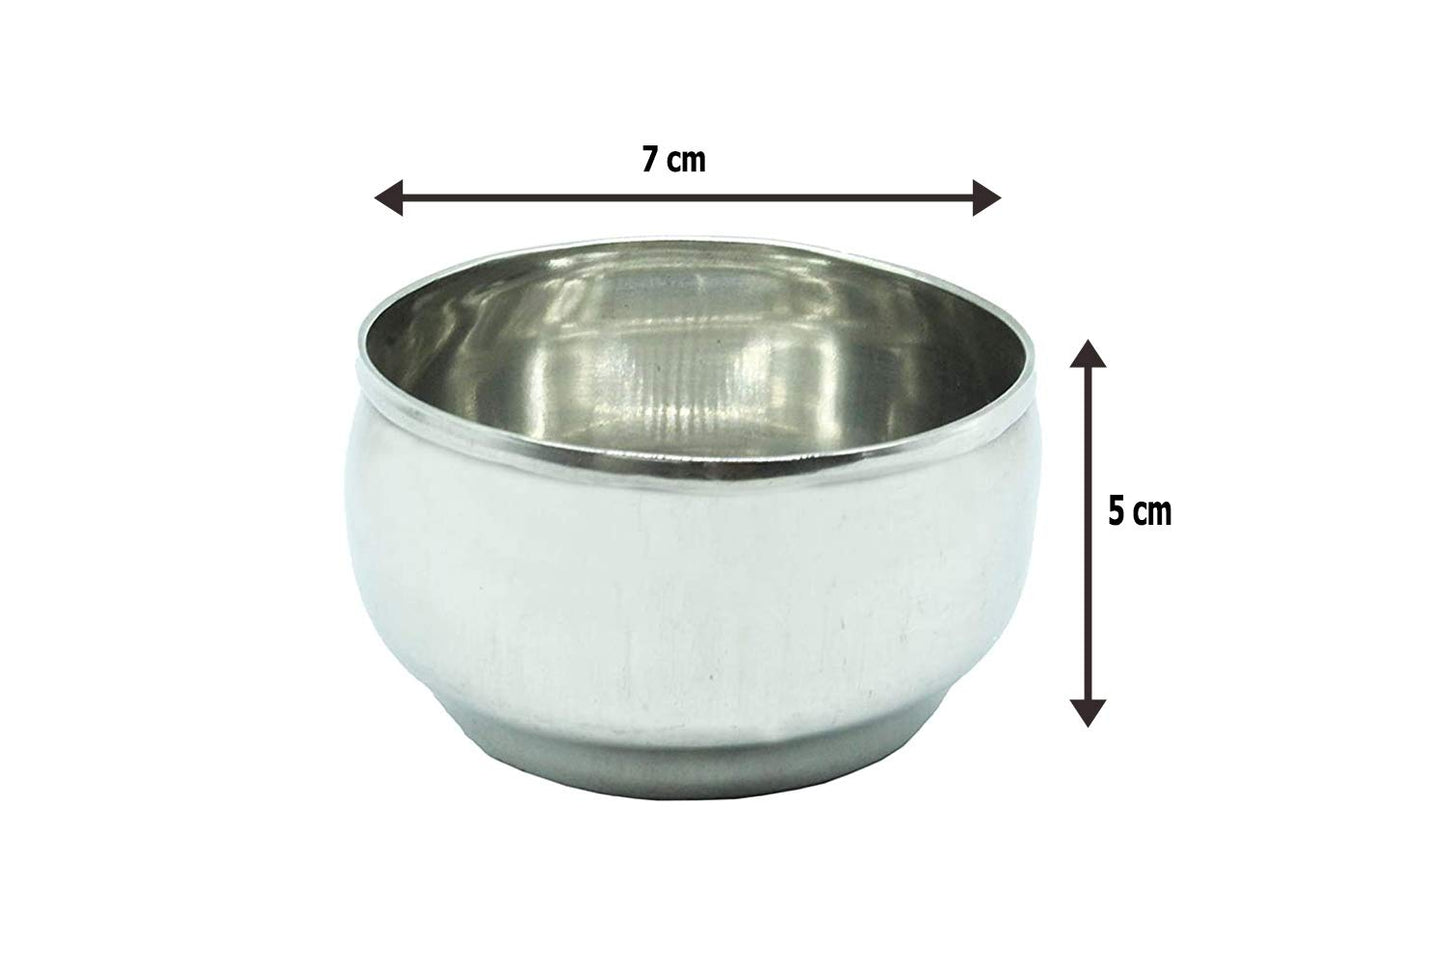 Stainless Steel Masala | Spice Dabba 7 Cups with Inner Plate Large - 22.5cm